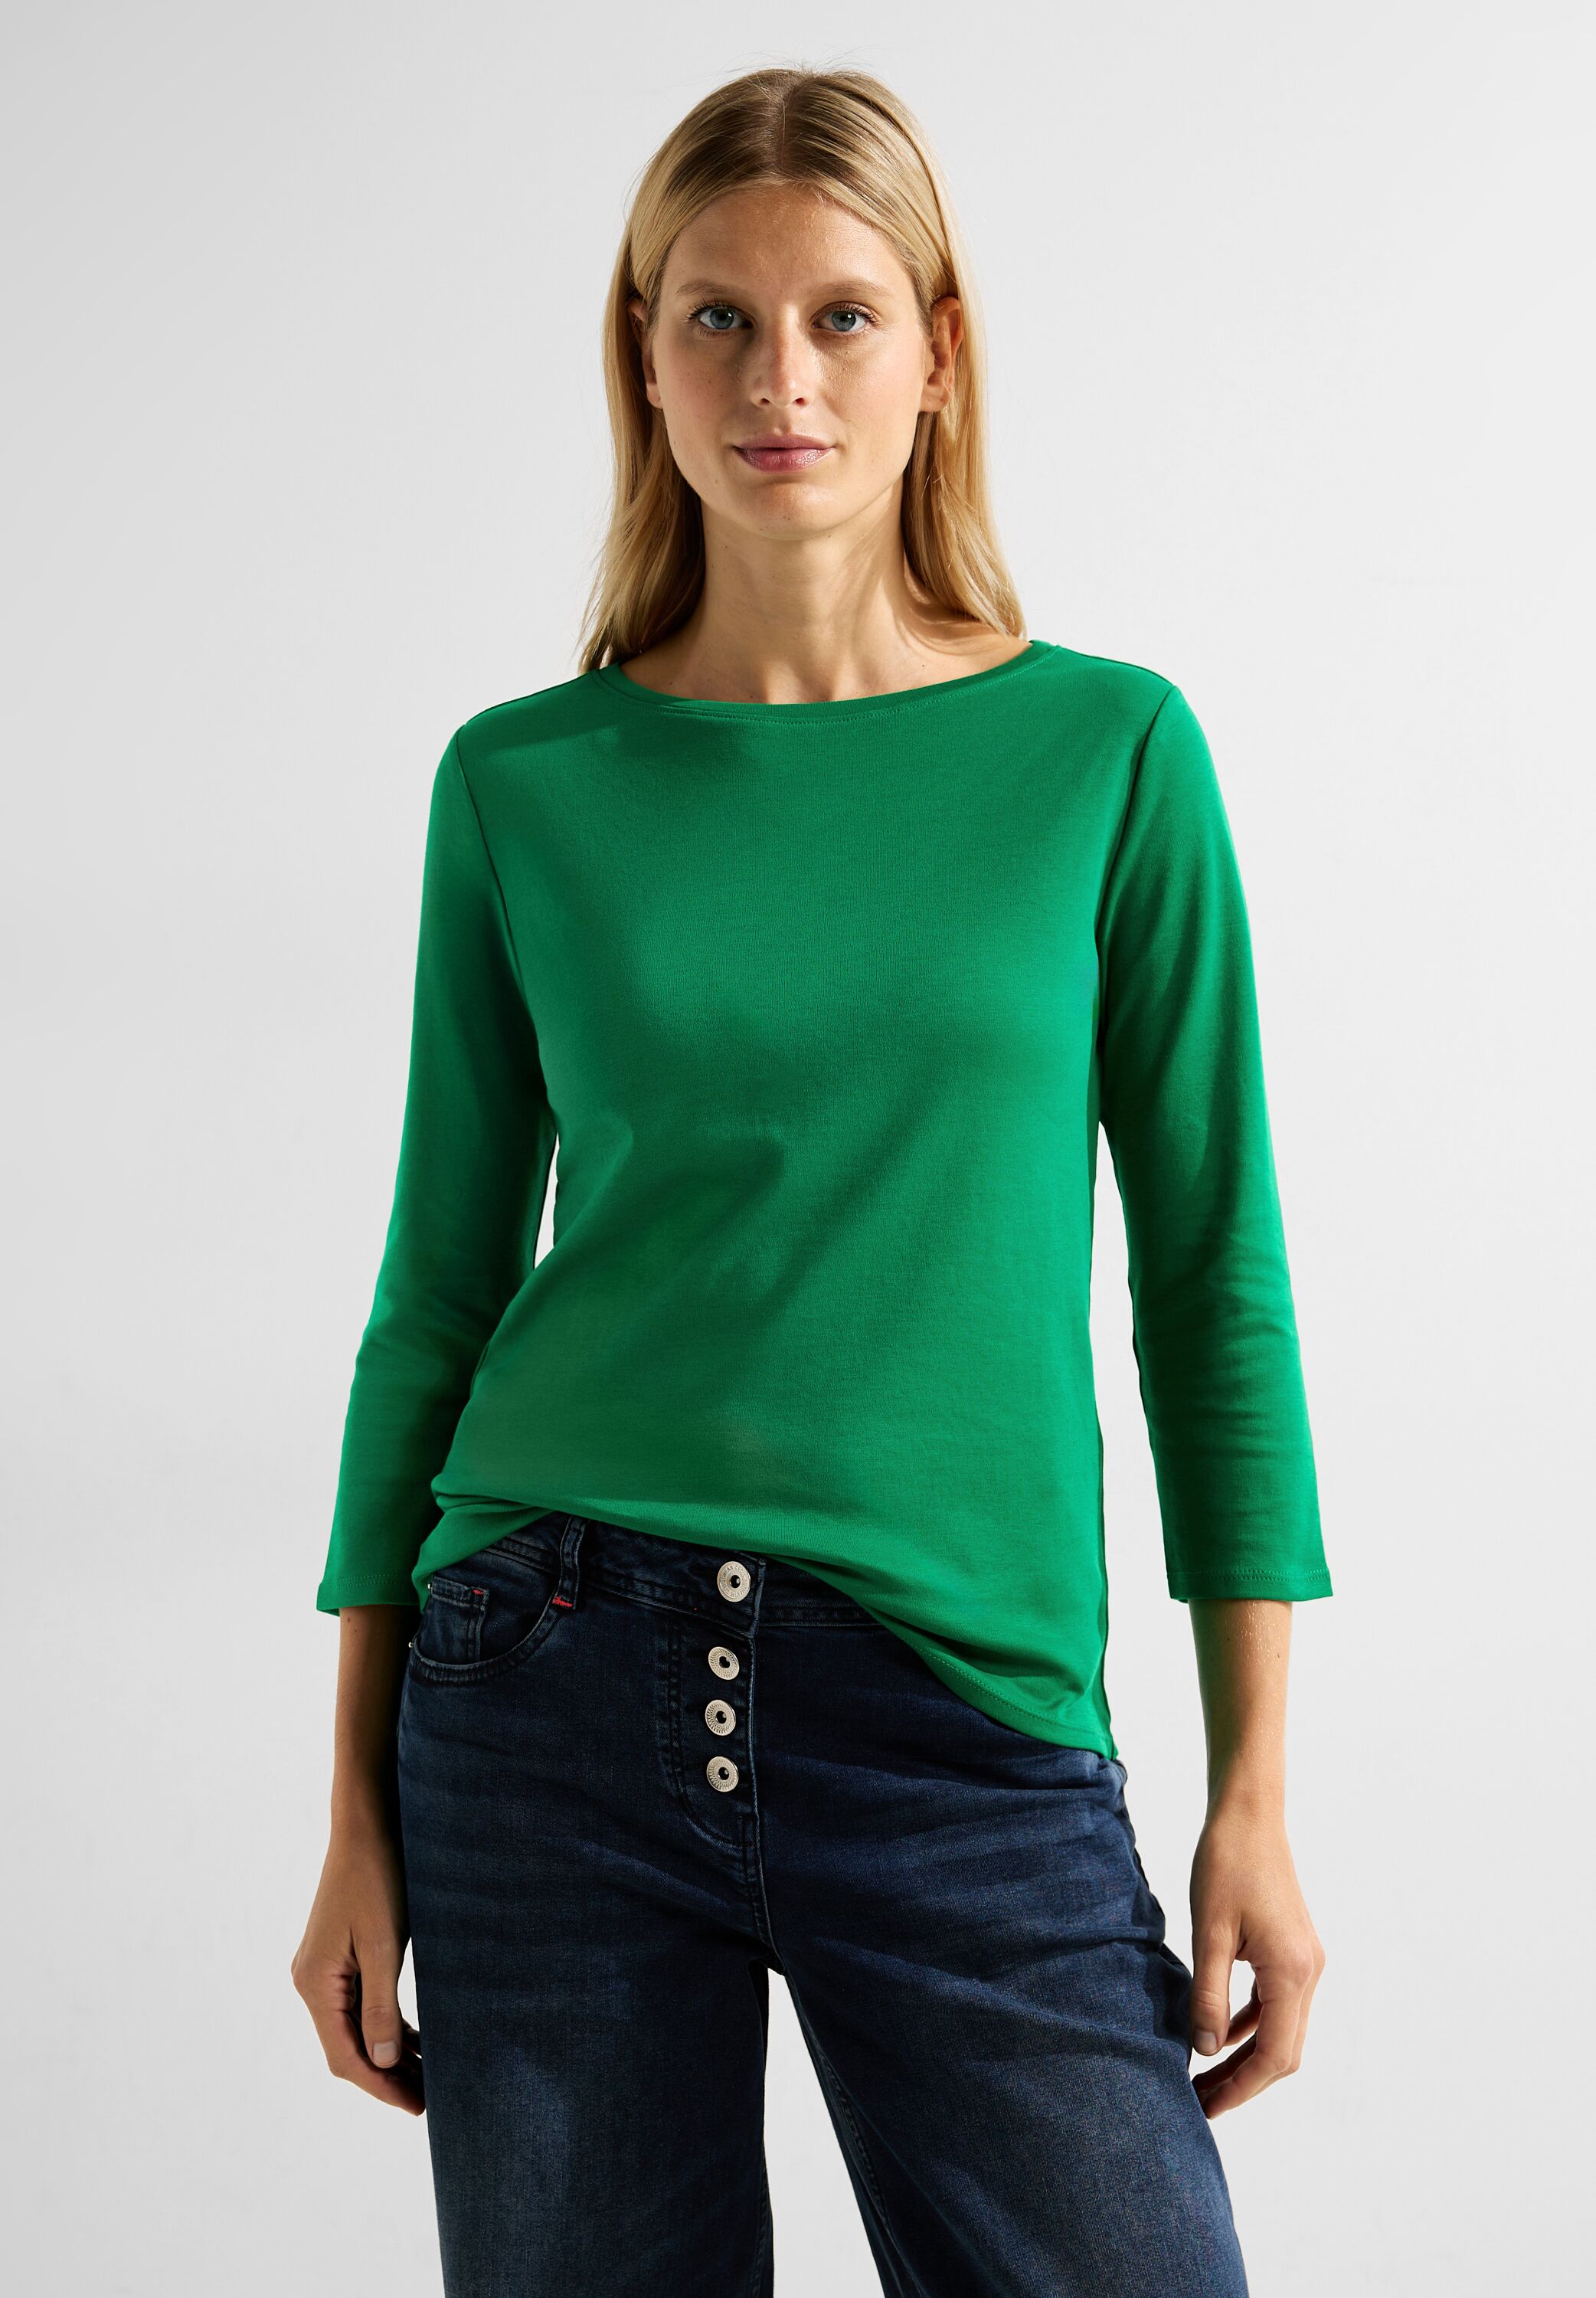 CONCEPT Easy CECIL - in B317389-15069 Mode Shirt Green